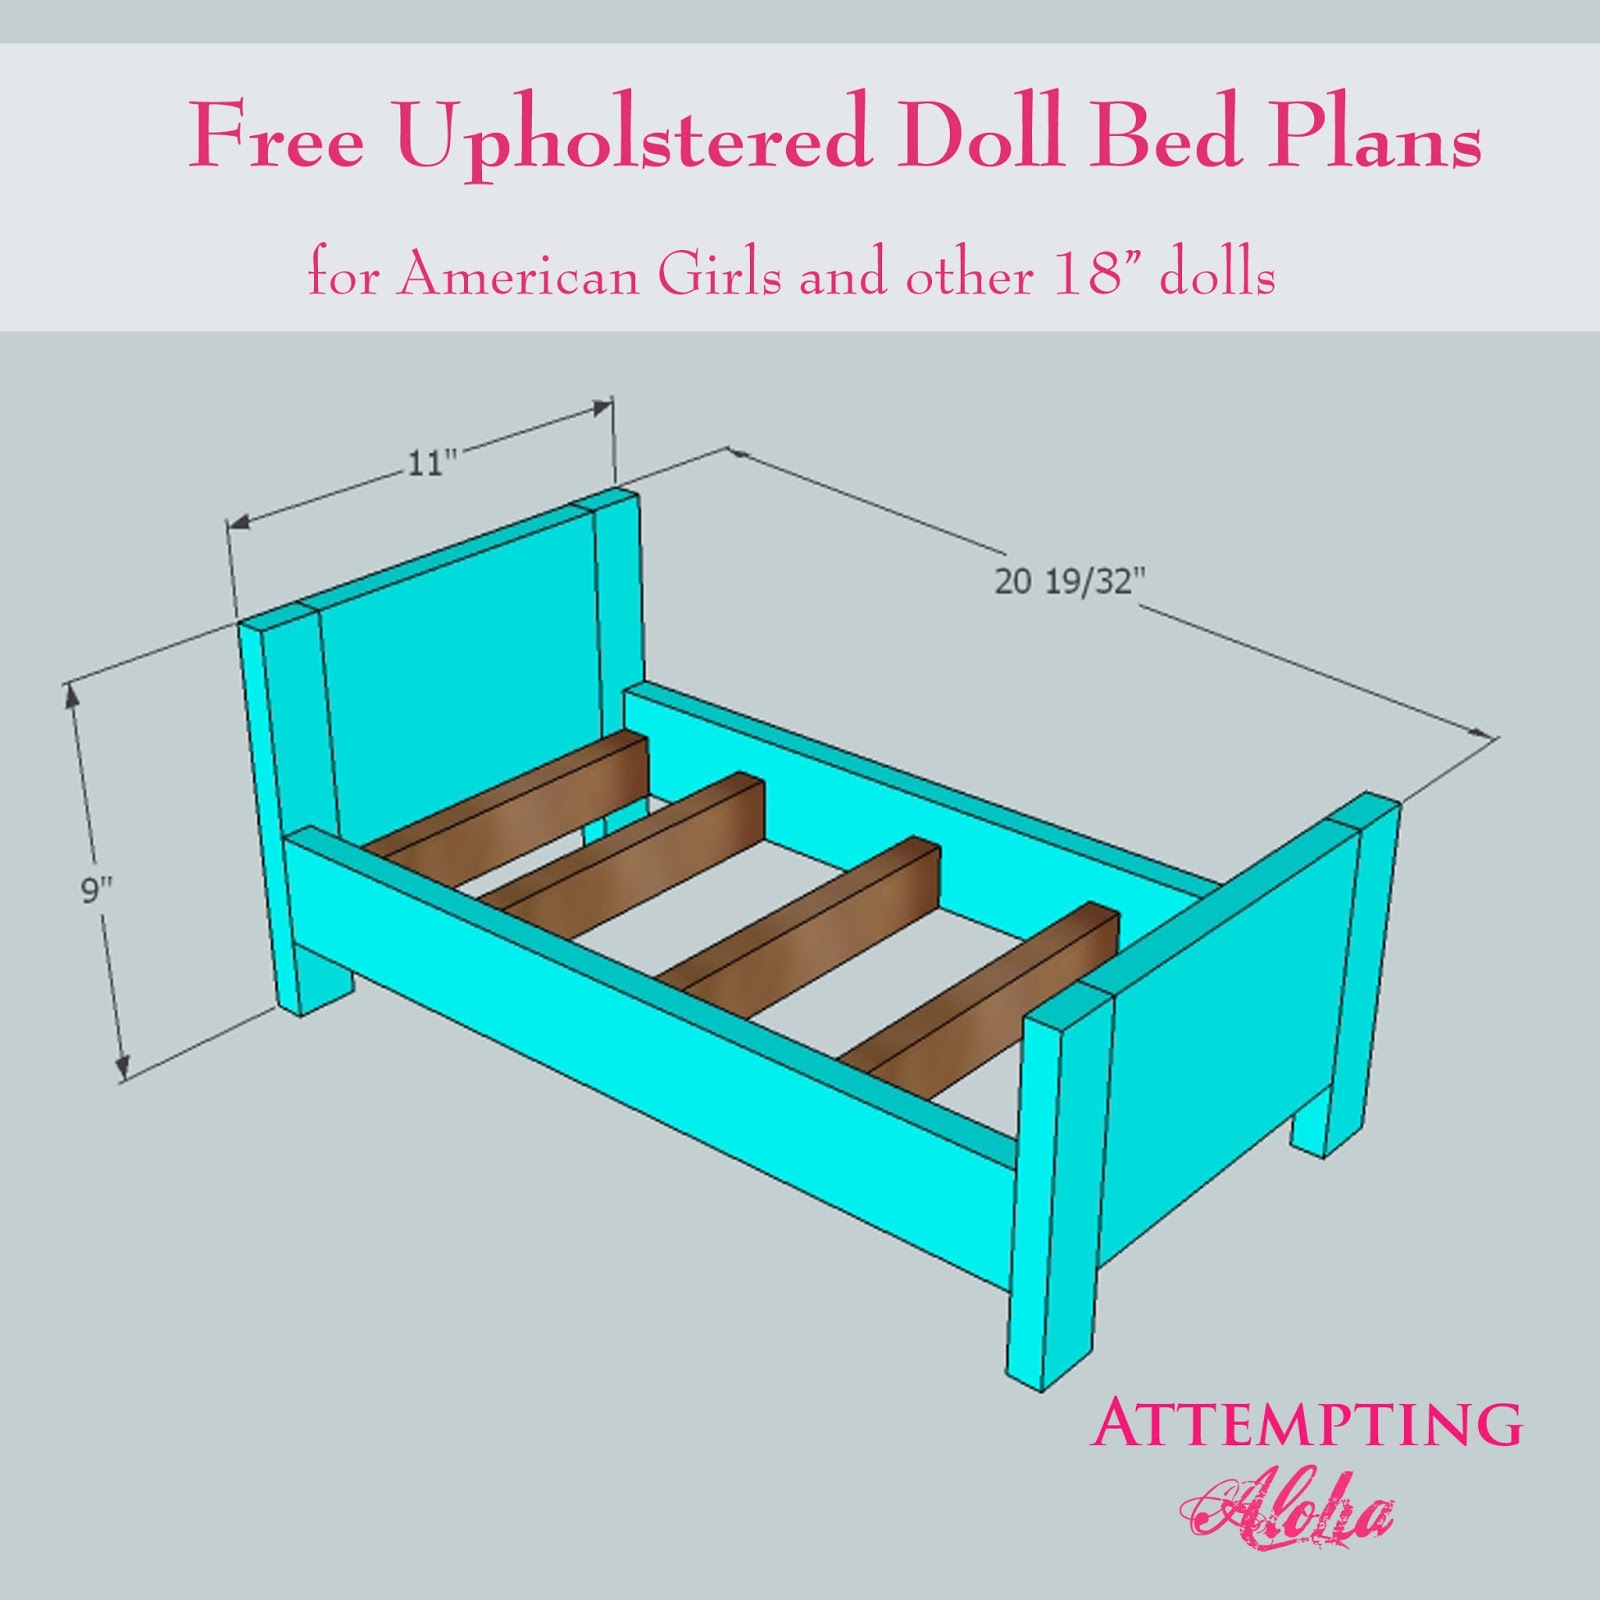 Here are links to my doll bedding tutorials and other doll beds: